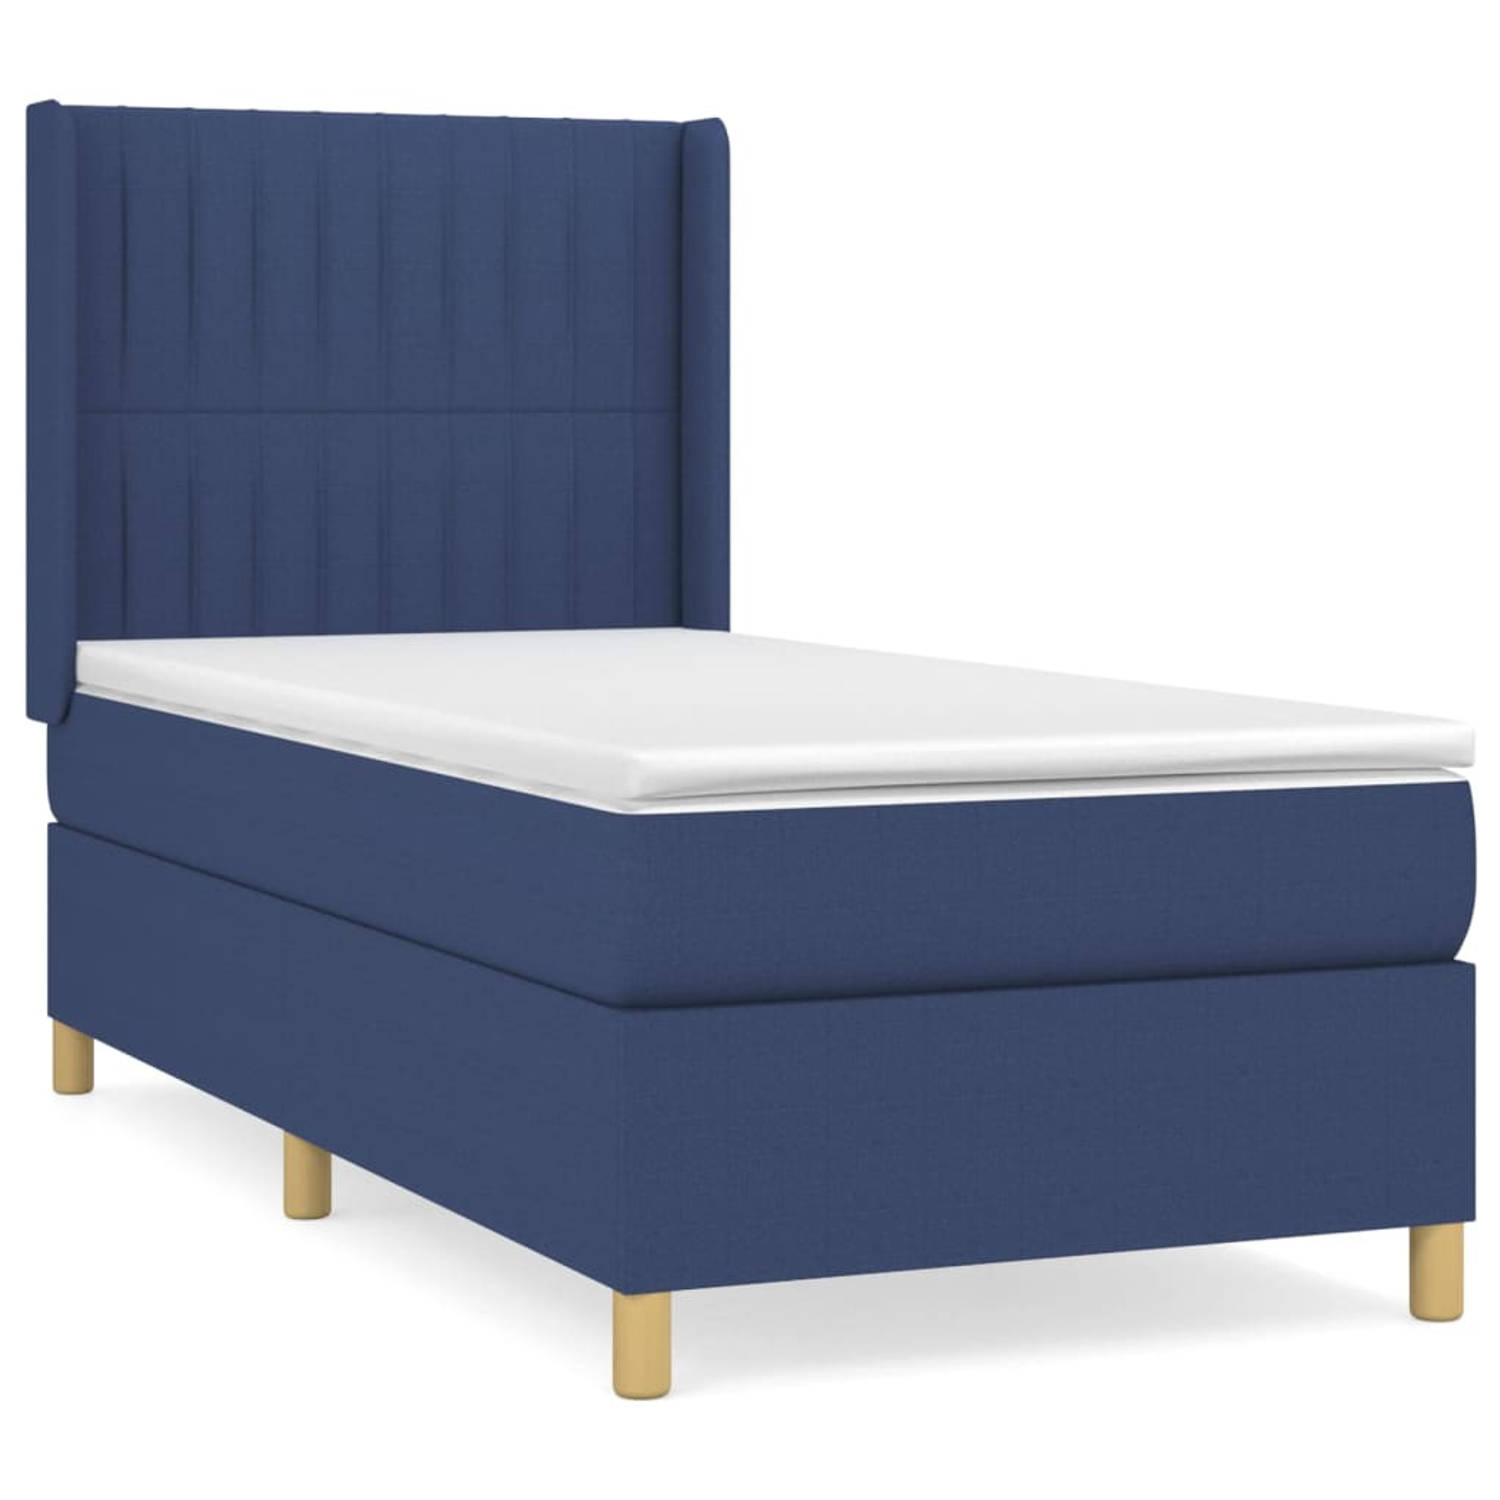 The Living Store Boxspringbed - Comfort - Bed - 193x93x118/128 cm - Blauw